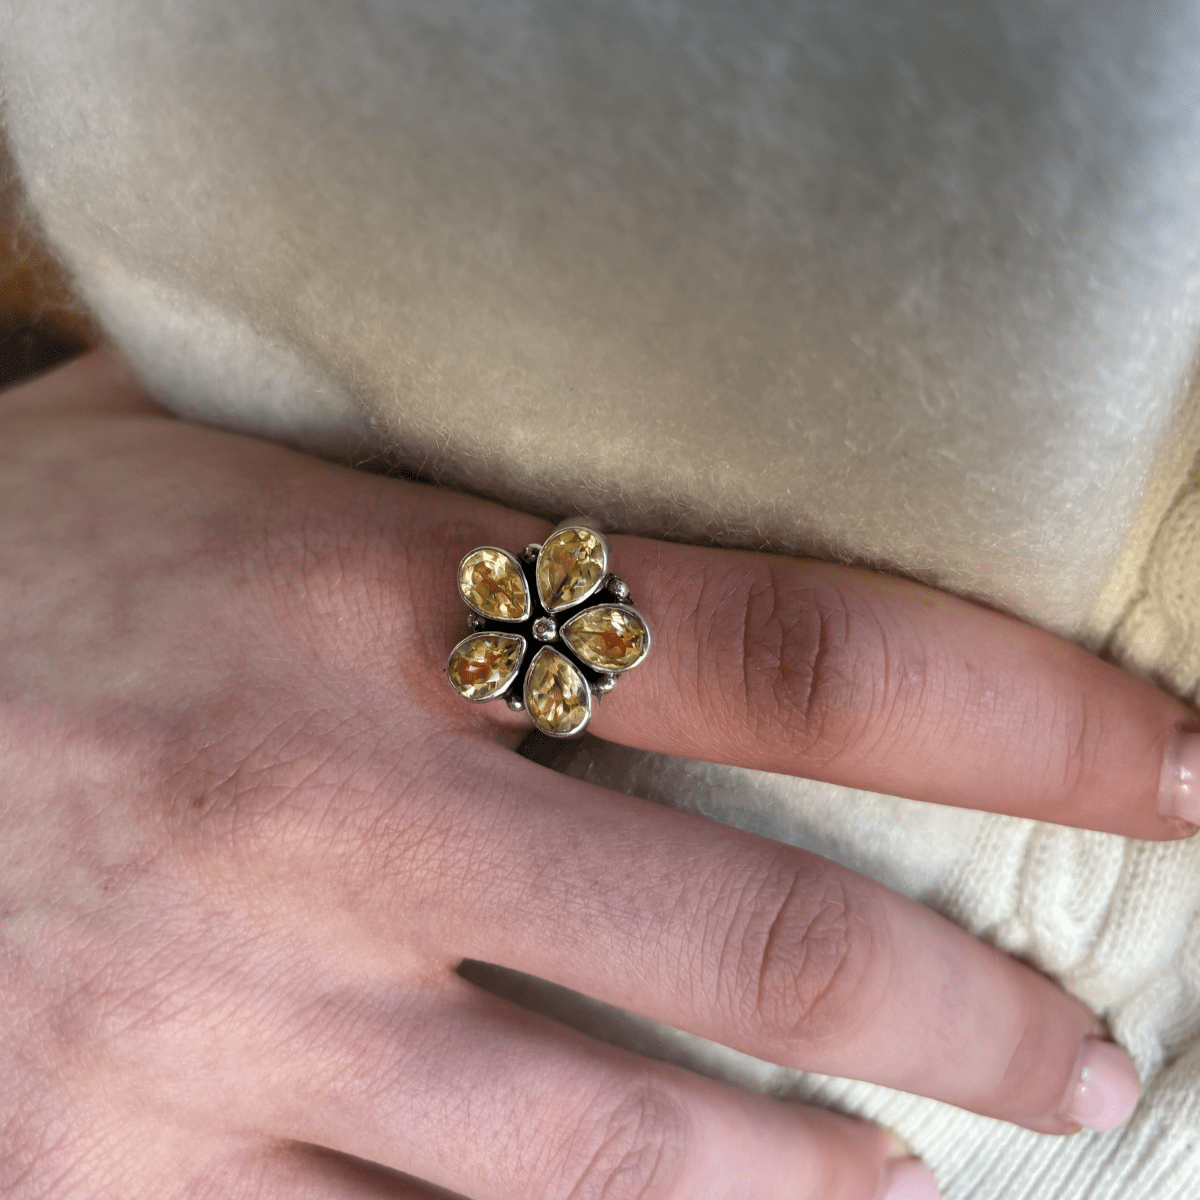 Sterling Silver Bee and Cherry Blossom Adjustable Ring